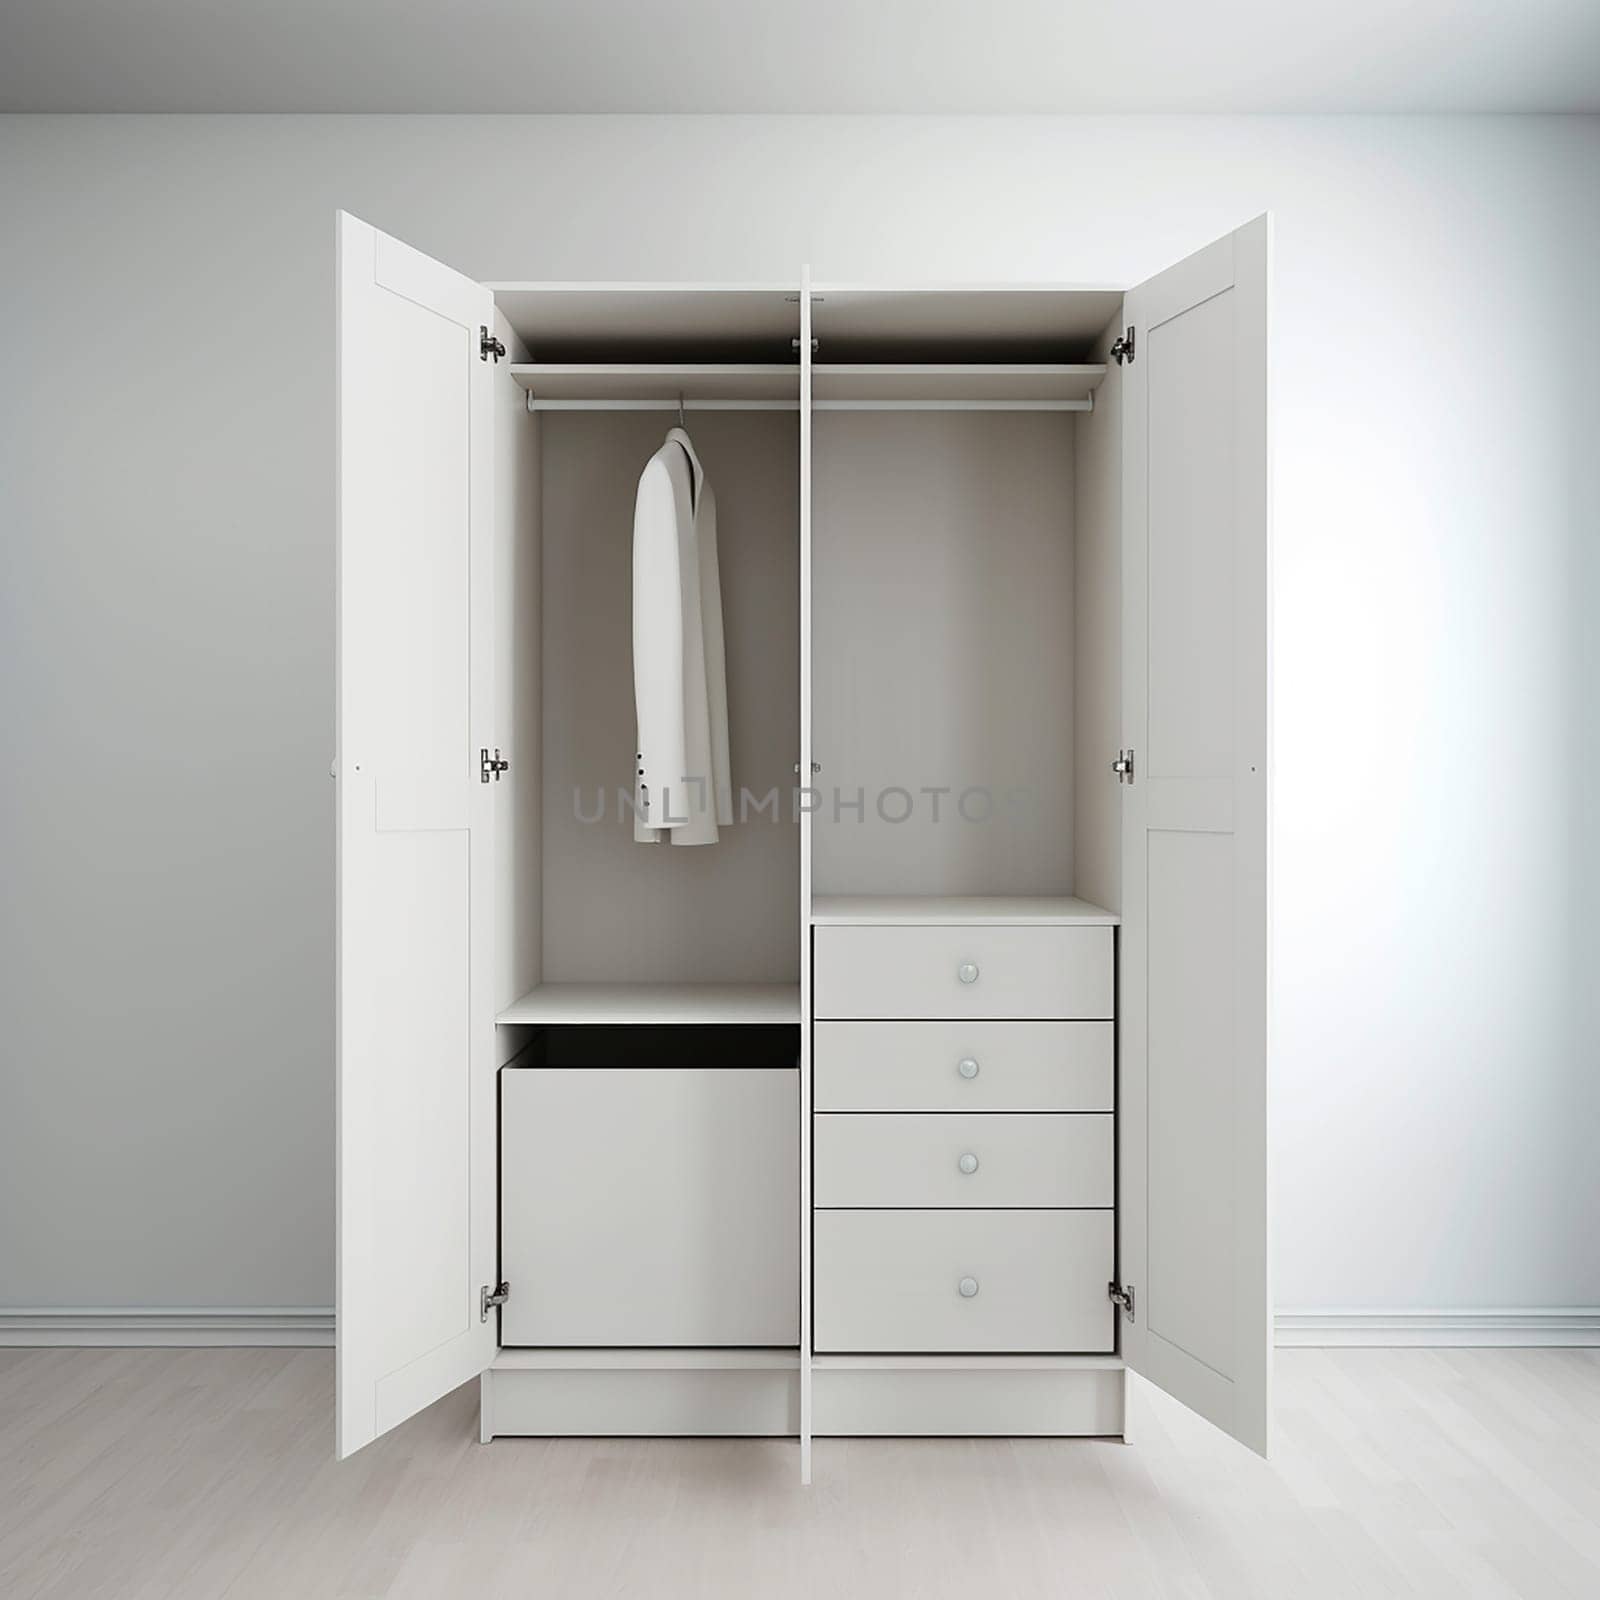 A modern white wardrobe with drawers and shelves by Hype2art